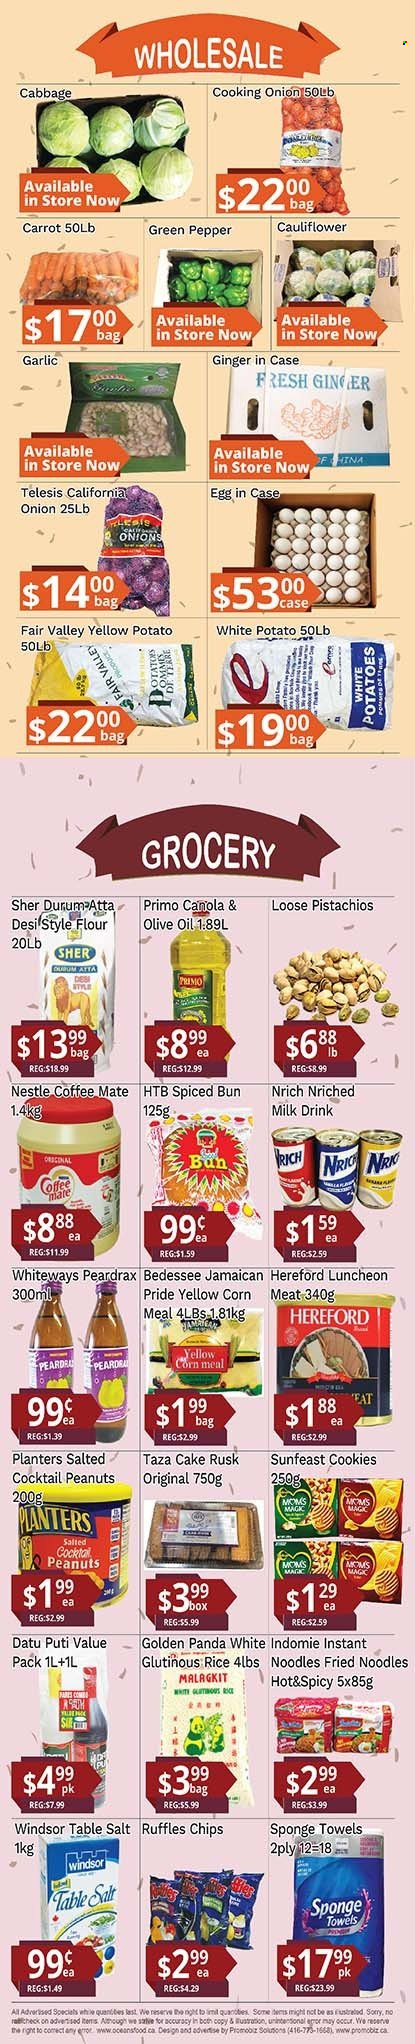 thumbnail - Oceans Flyer - November 25, 2022 - December 01, 2022 - Sales products - cake, rusks, cabbage, corn, garlic, potatoes, onion, green pepper, Sunfeast, noodles, lunch meat, Coffee-Mate, milk, eggs, cookies, chips, Ruffles, flour, corned meat, rice, olive oil, oil, peanuts, pistachios, Planters, comb, Nestlé. Page 2.